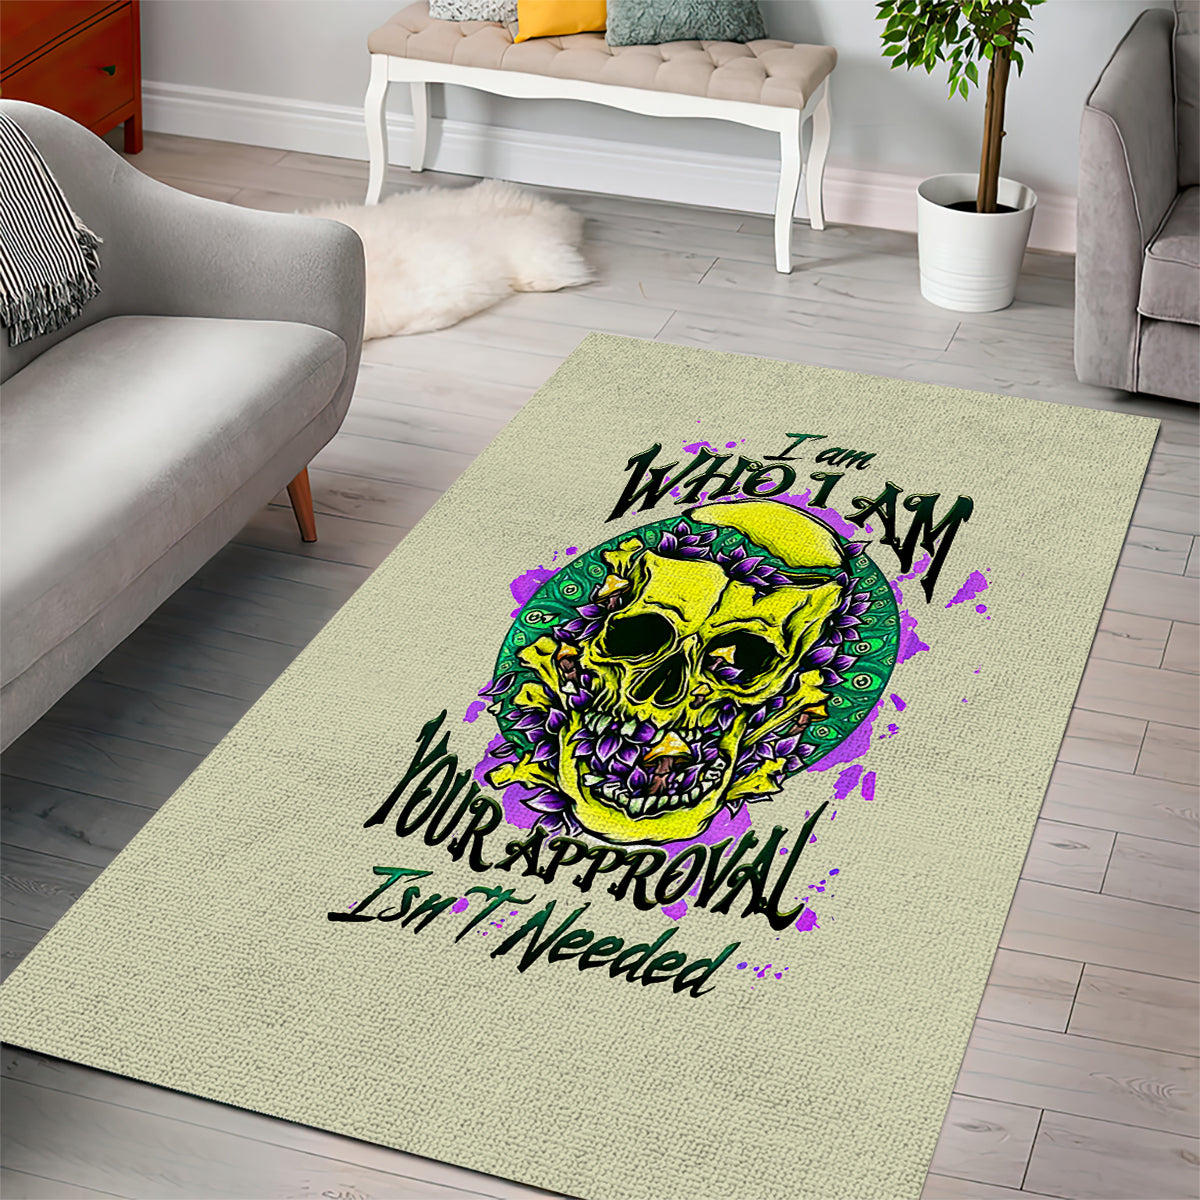 flower-skull-area-rug-iam-who-iam-your-approval-isnt-need